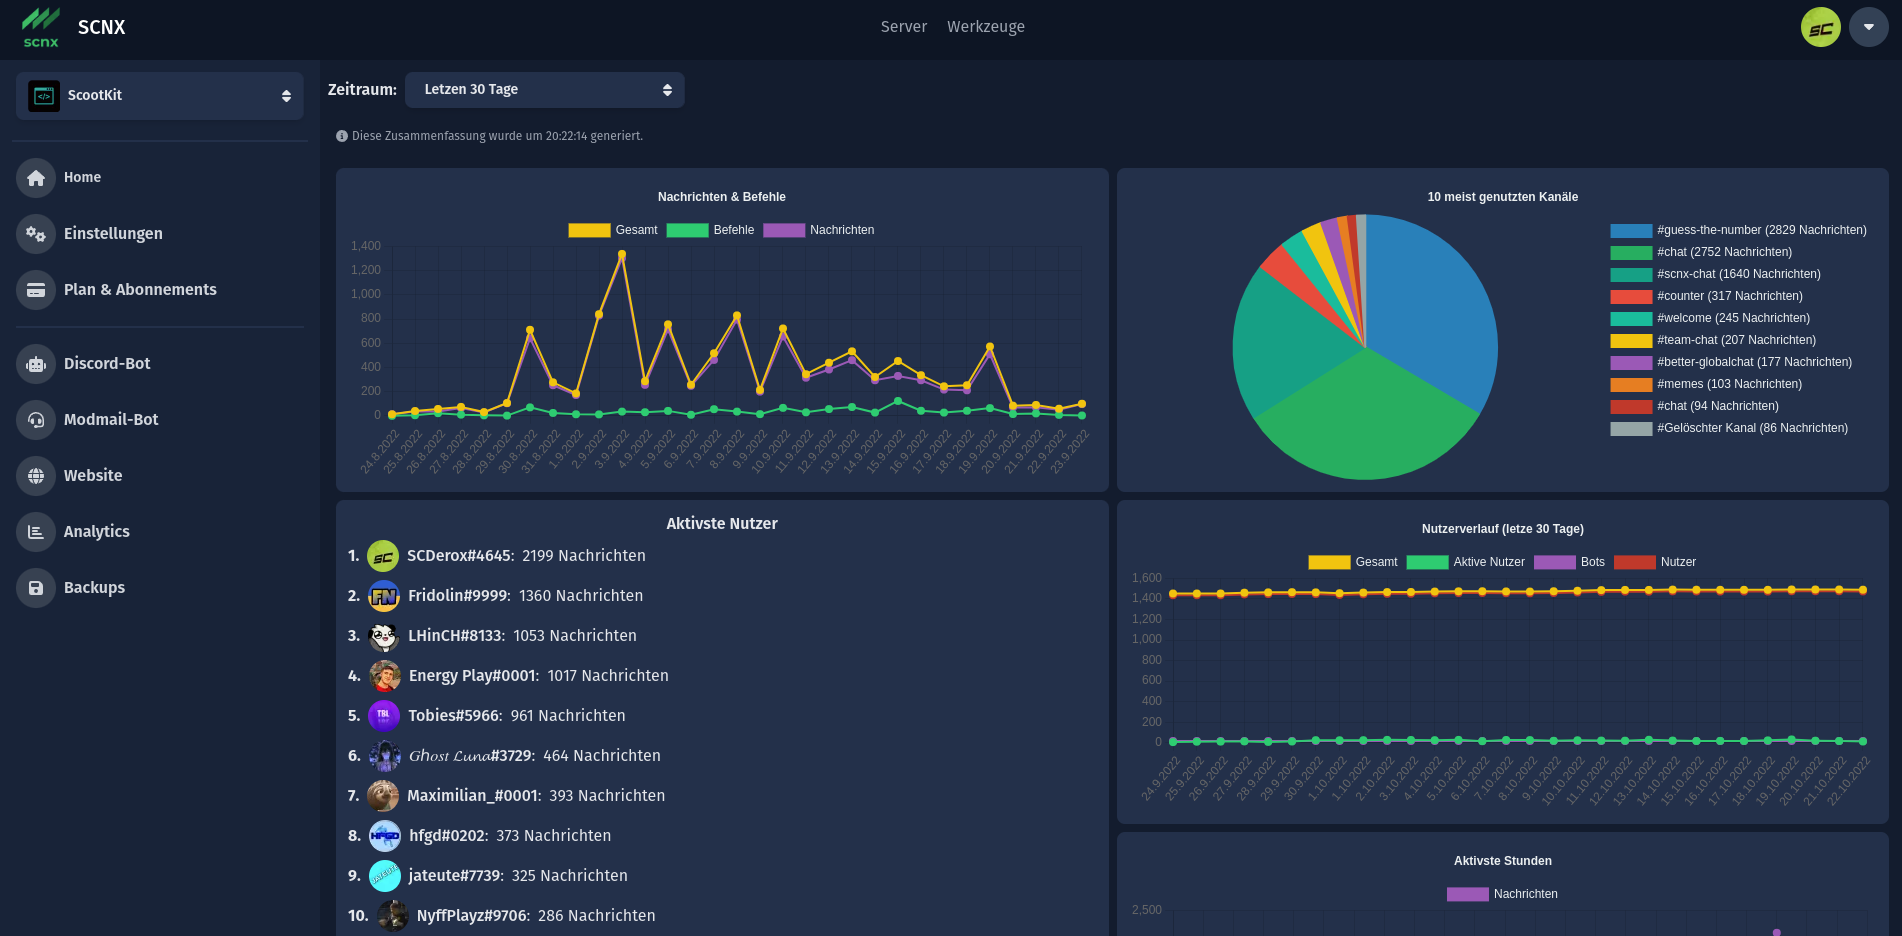 Screenshot showing the analytics page of a server in the SCNX Dashboard